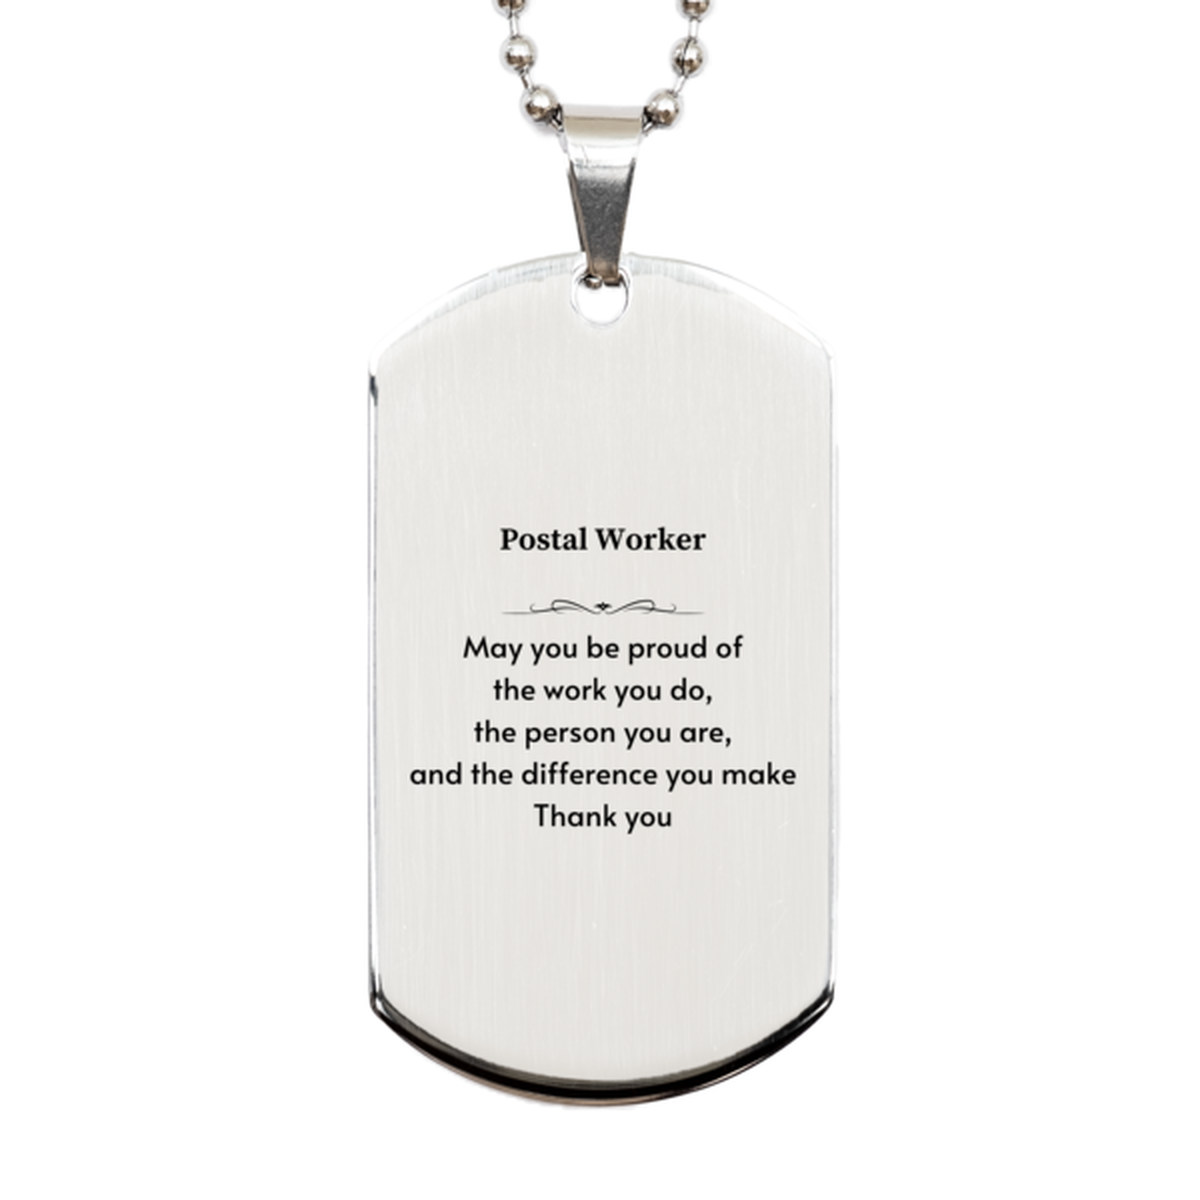 Heartwarming Silver Dog Tag Retirement Coworkers Gifts for Postal Worker, Postal Worker May You be proud of the work you do, the person you are Gifts for Boss Men Women Friends